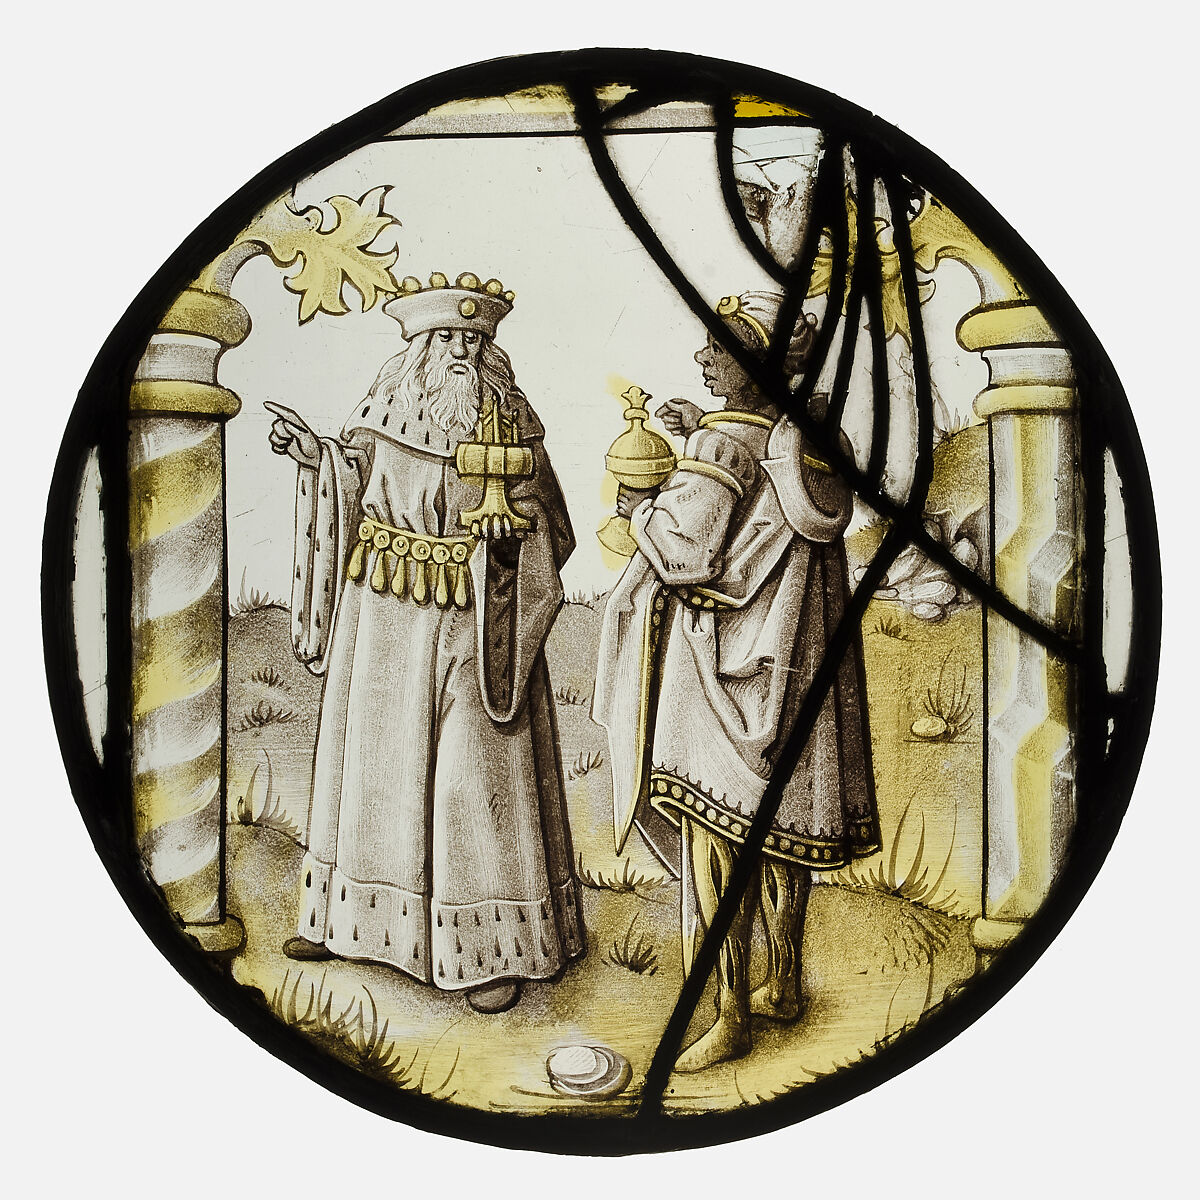 Roundel with two Kings from an Adoration Group, Colorless glass, silver stain, vitreous paint, German 